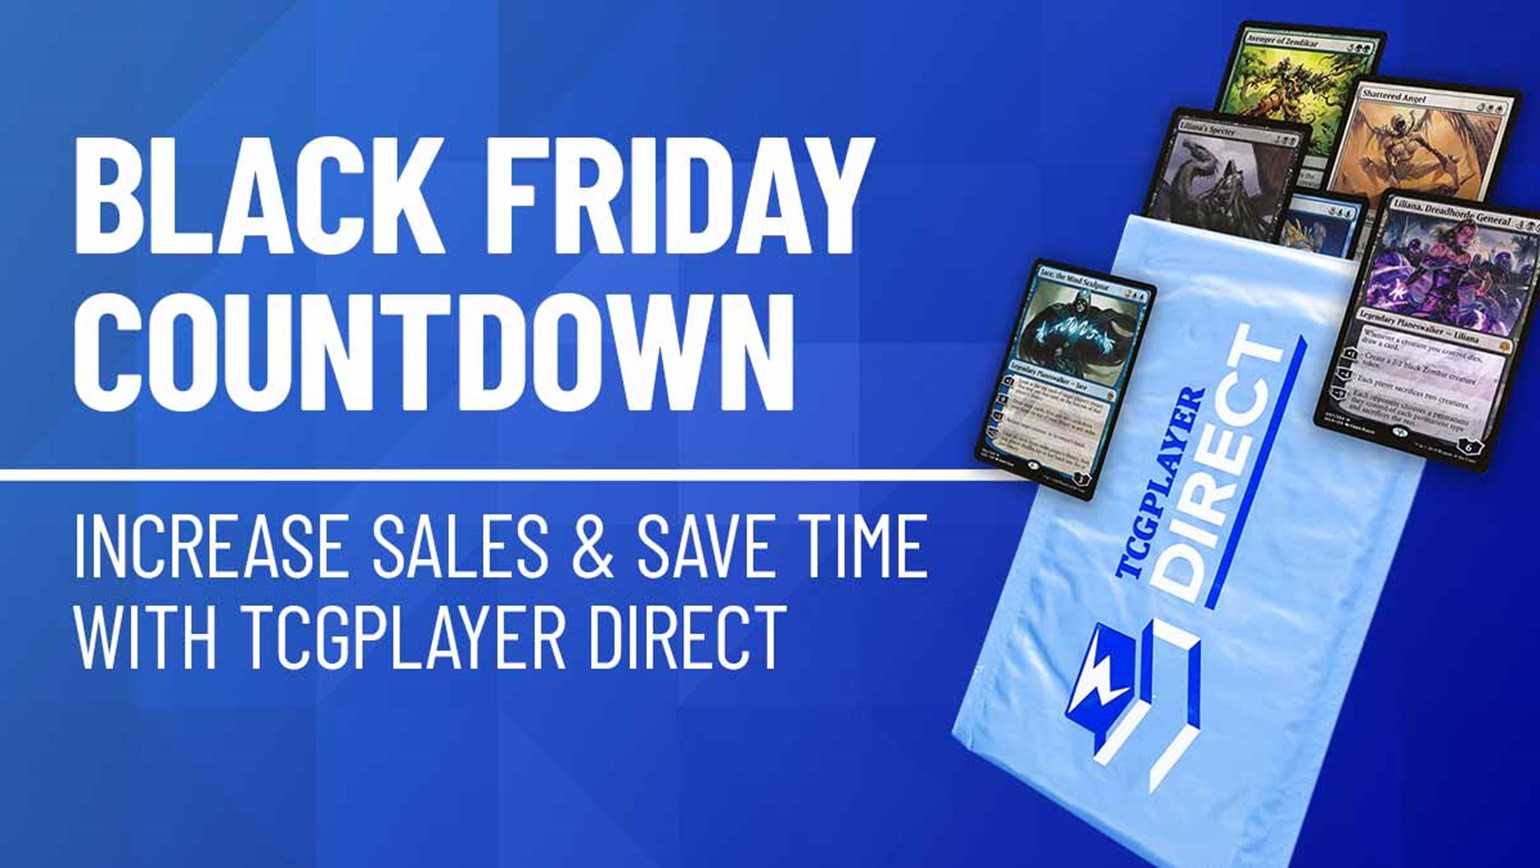 Black Friday Countdown Increase Sales and Save Time with TCGplayer Direct